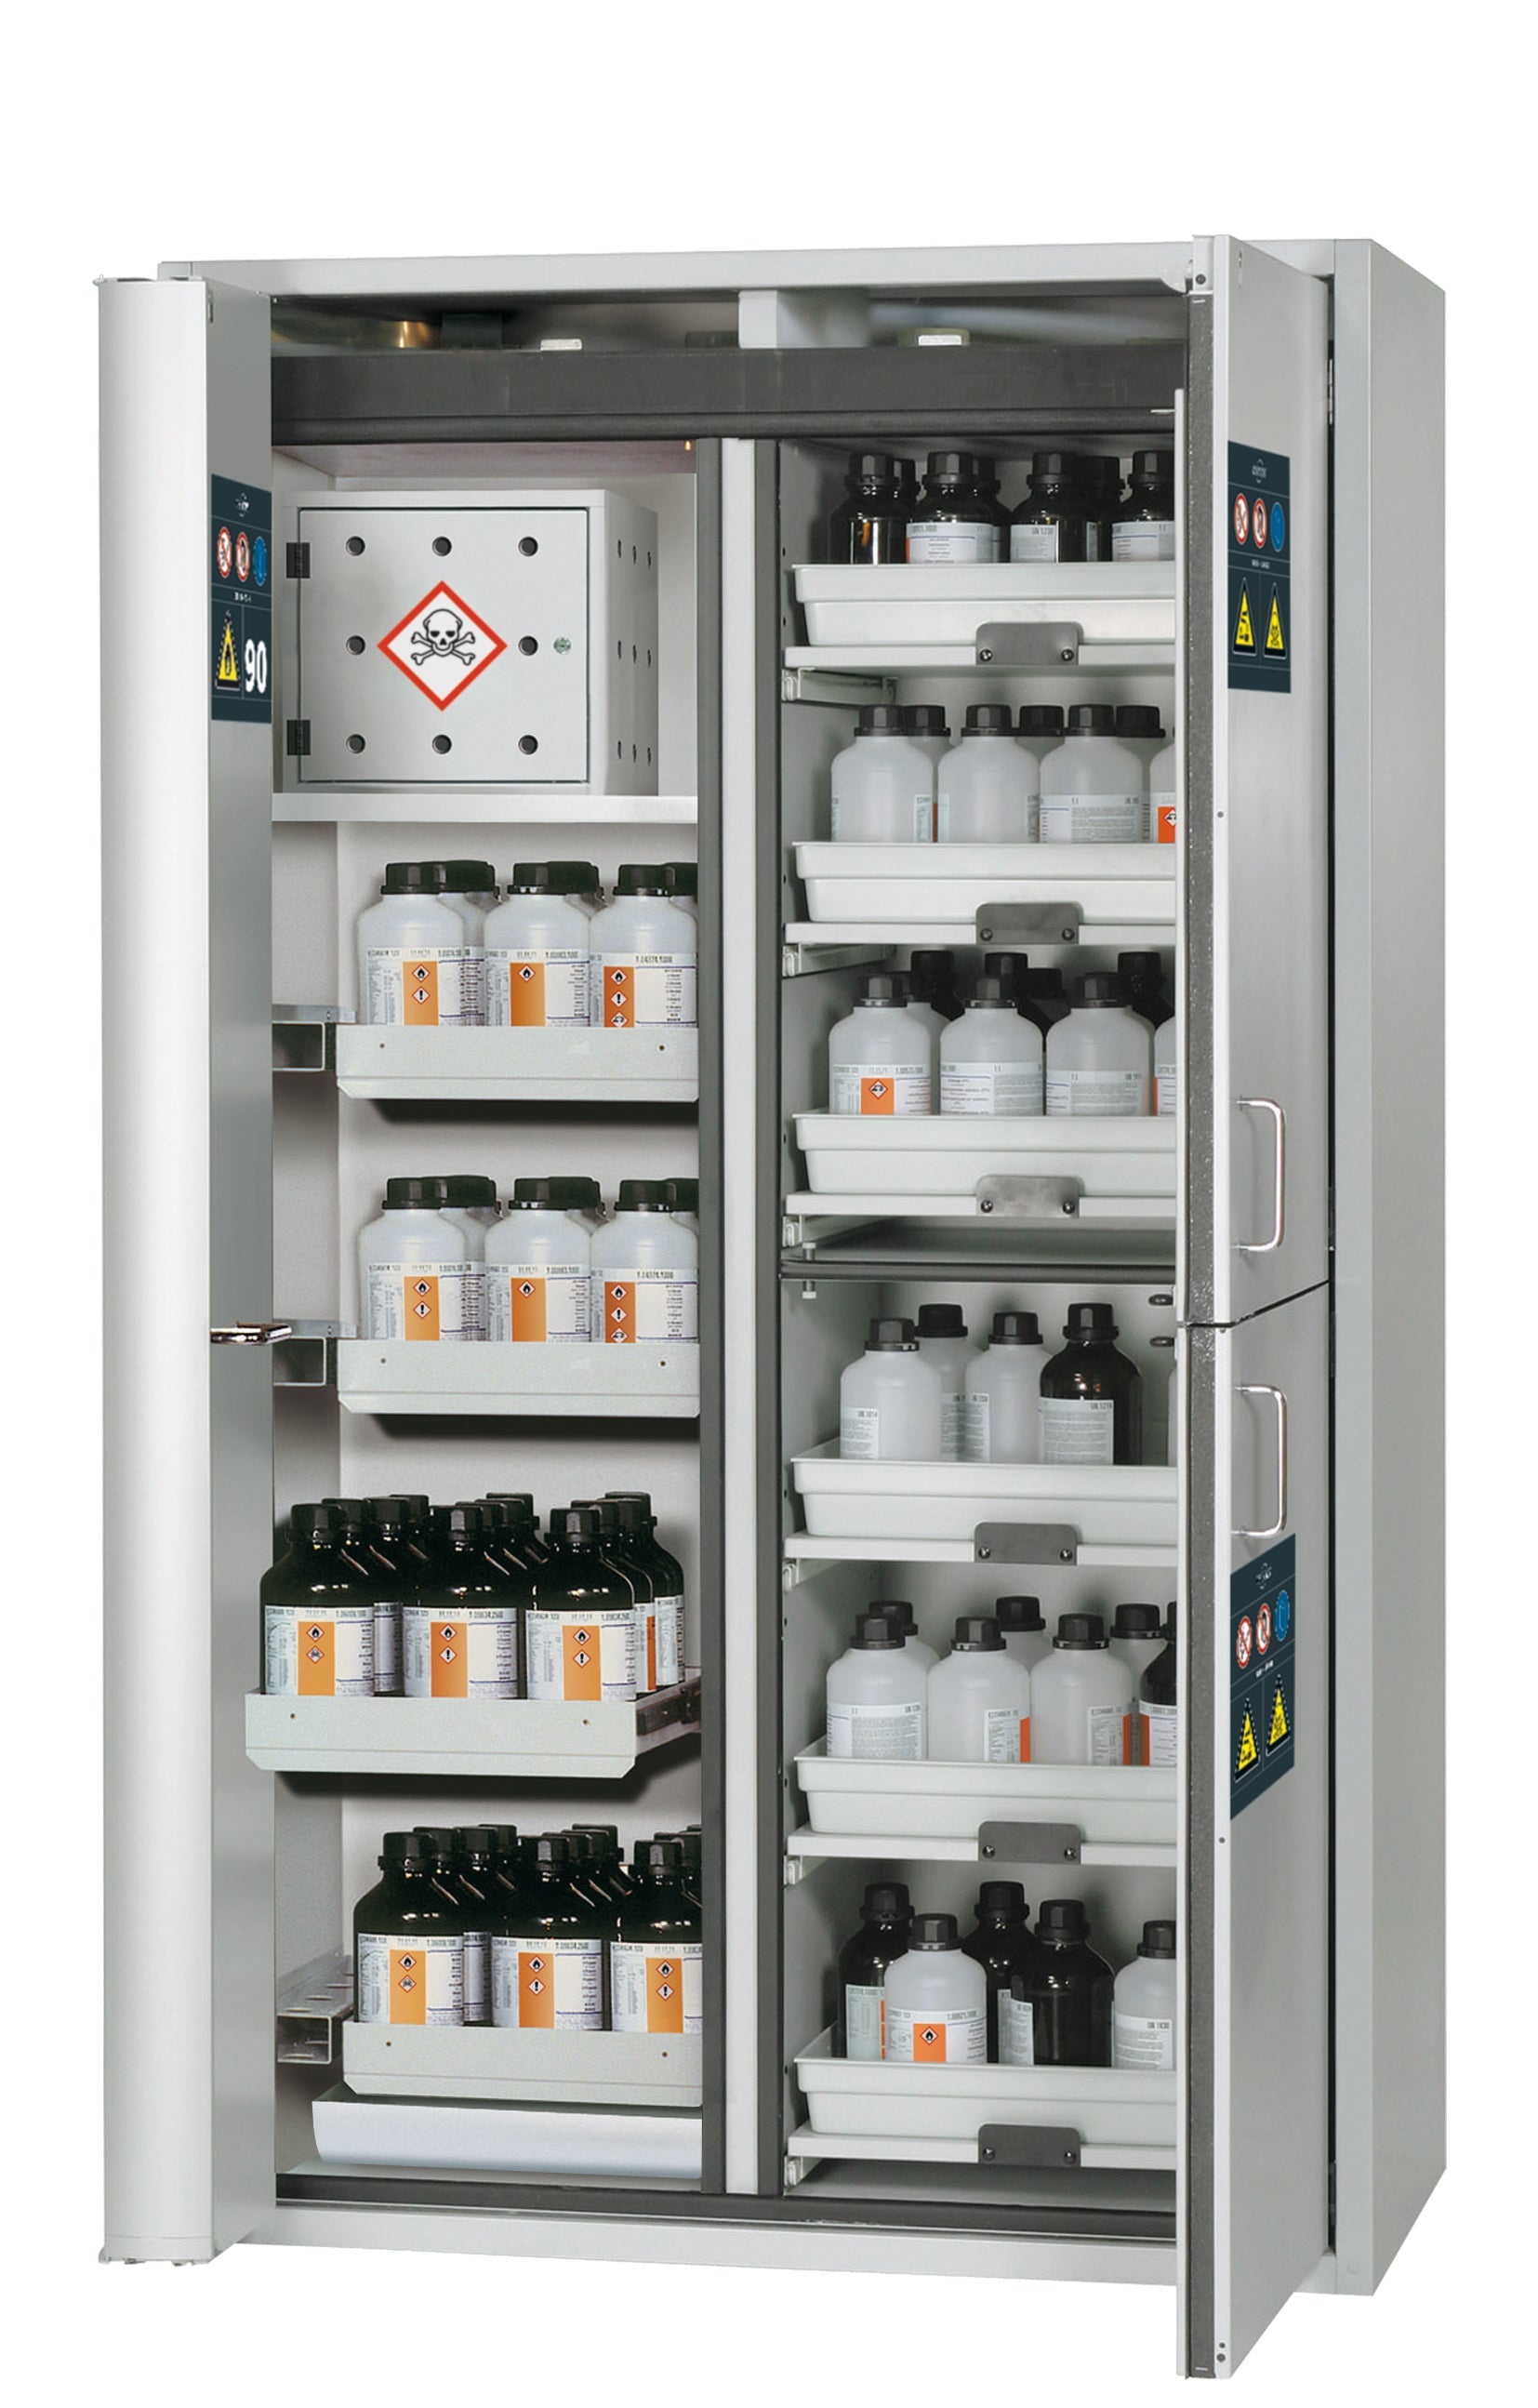 Type 90 combination safety cabinet K-PHOENIX Vol.2-90 model K90.196.120.MC.FWAC in light gray RAL 7035 with 4x standard pull-out tray (sheet steel)